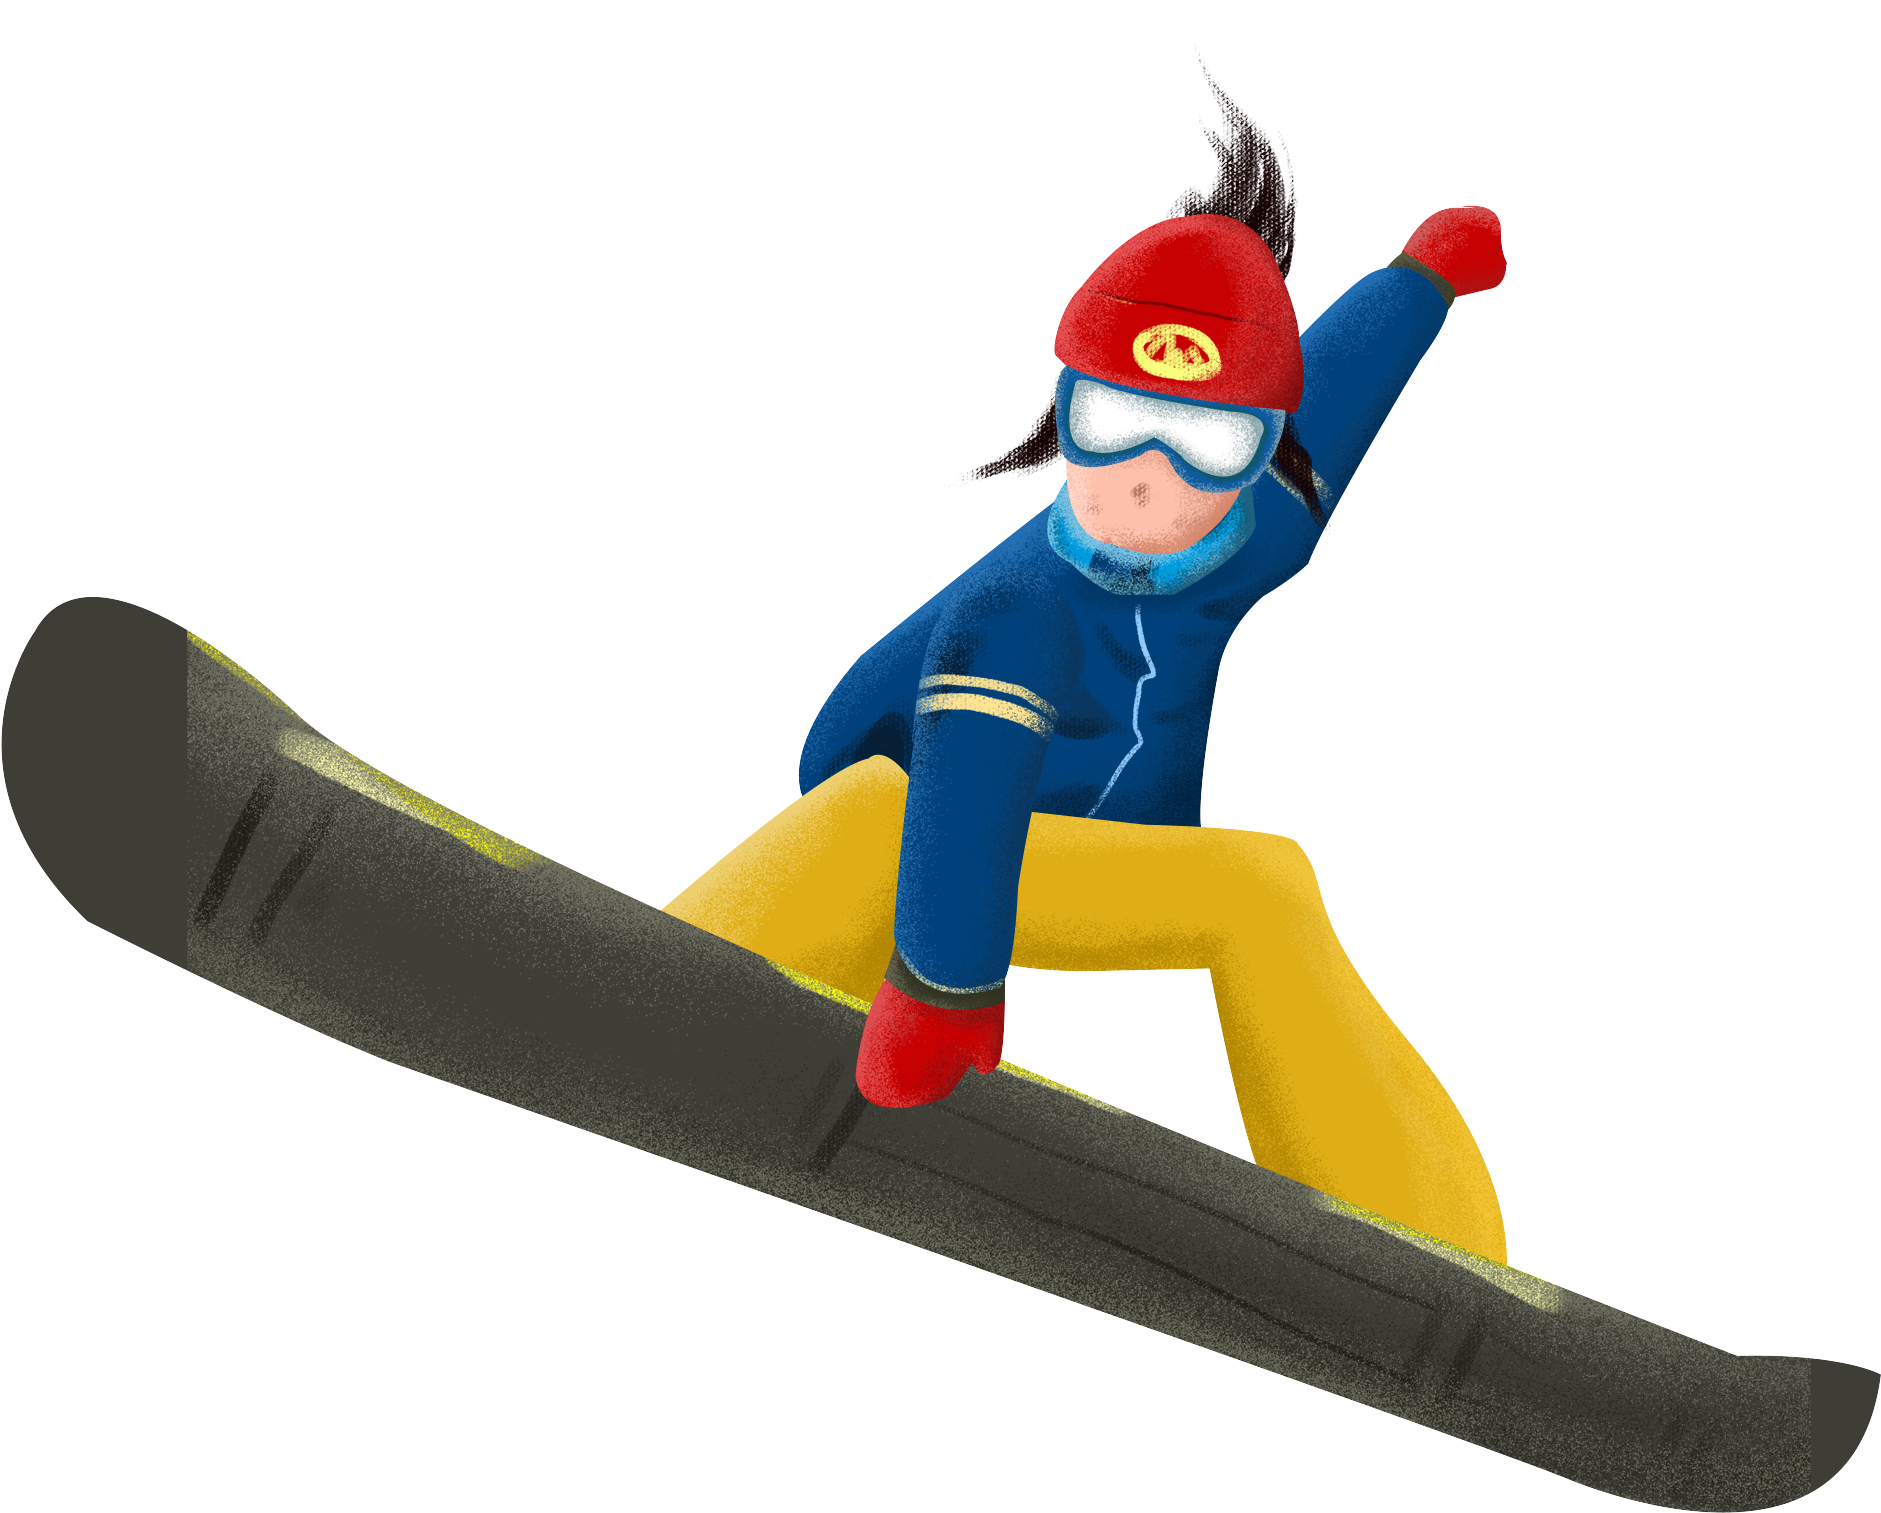 Animated Snowboarder In Action.png PNG